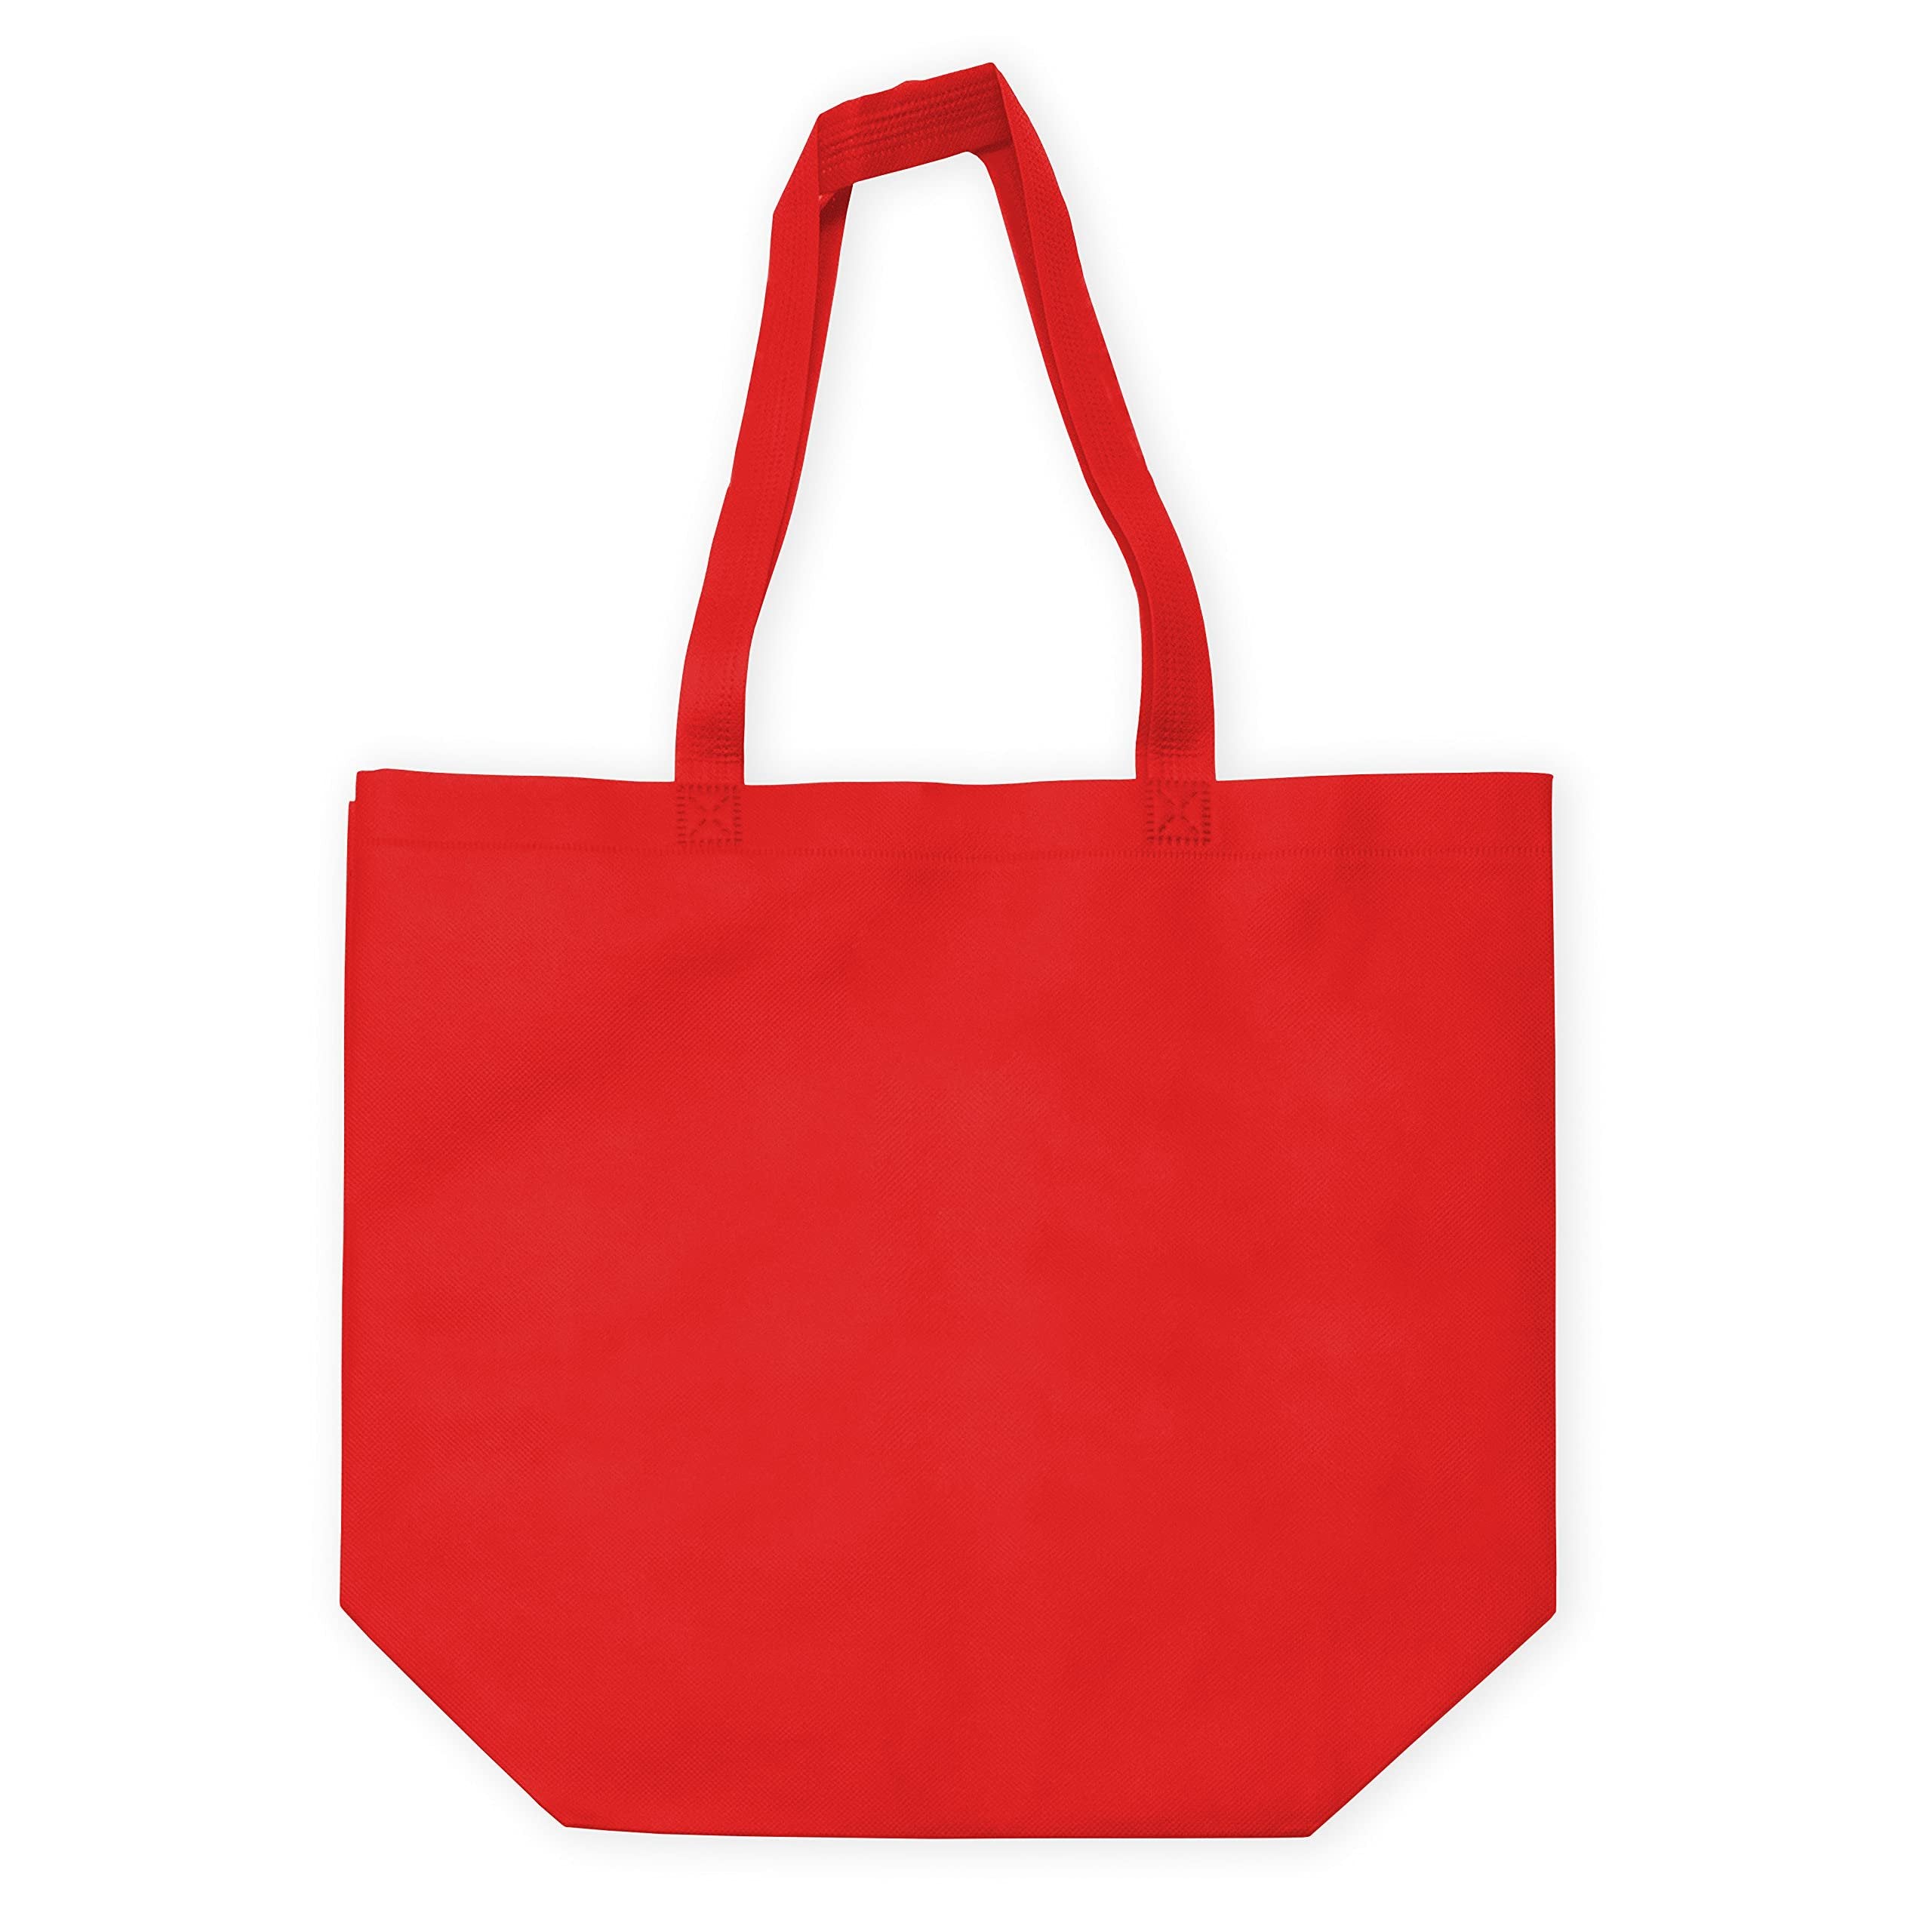 Reusable Gift Bags - 12 Pack Large Totes with Handles, Strong Red Eco Friendly Fabric Cloth for Shopping, Merchandise, Events, Parties, Take-Out, Boutiques, Retail Stores, Small Business Bulk -16x6x12